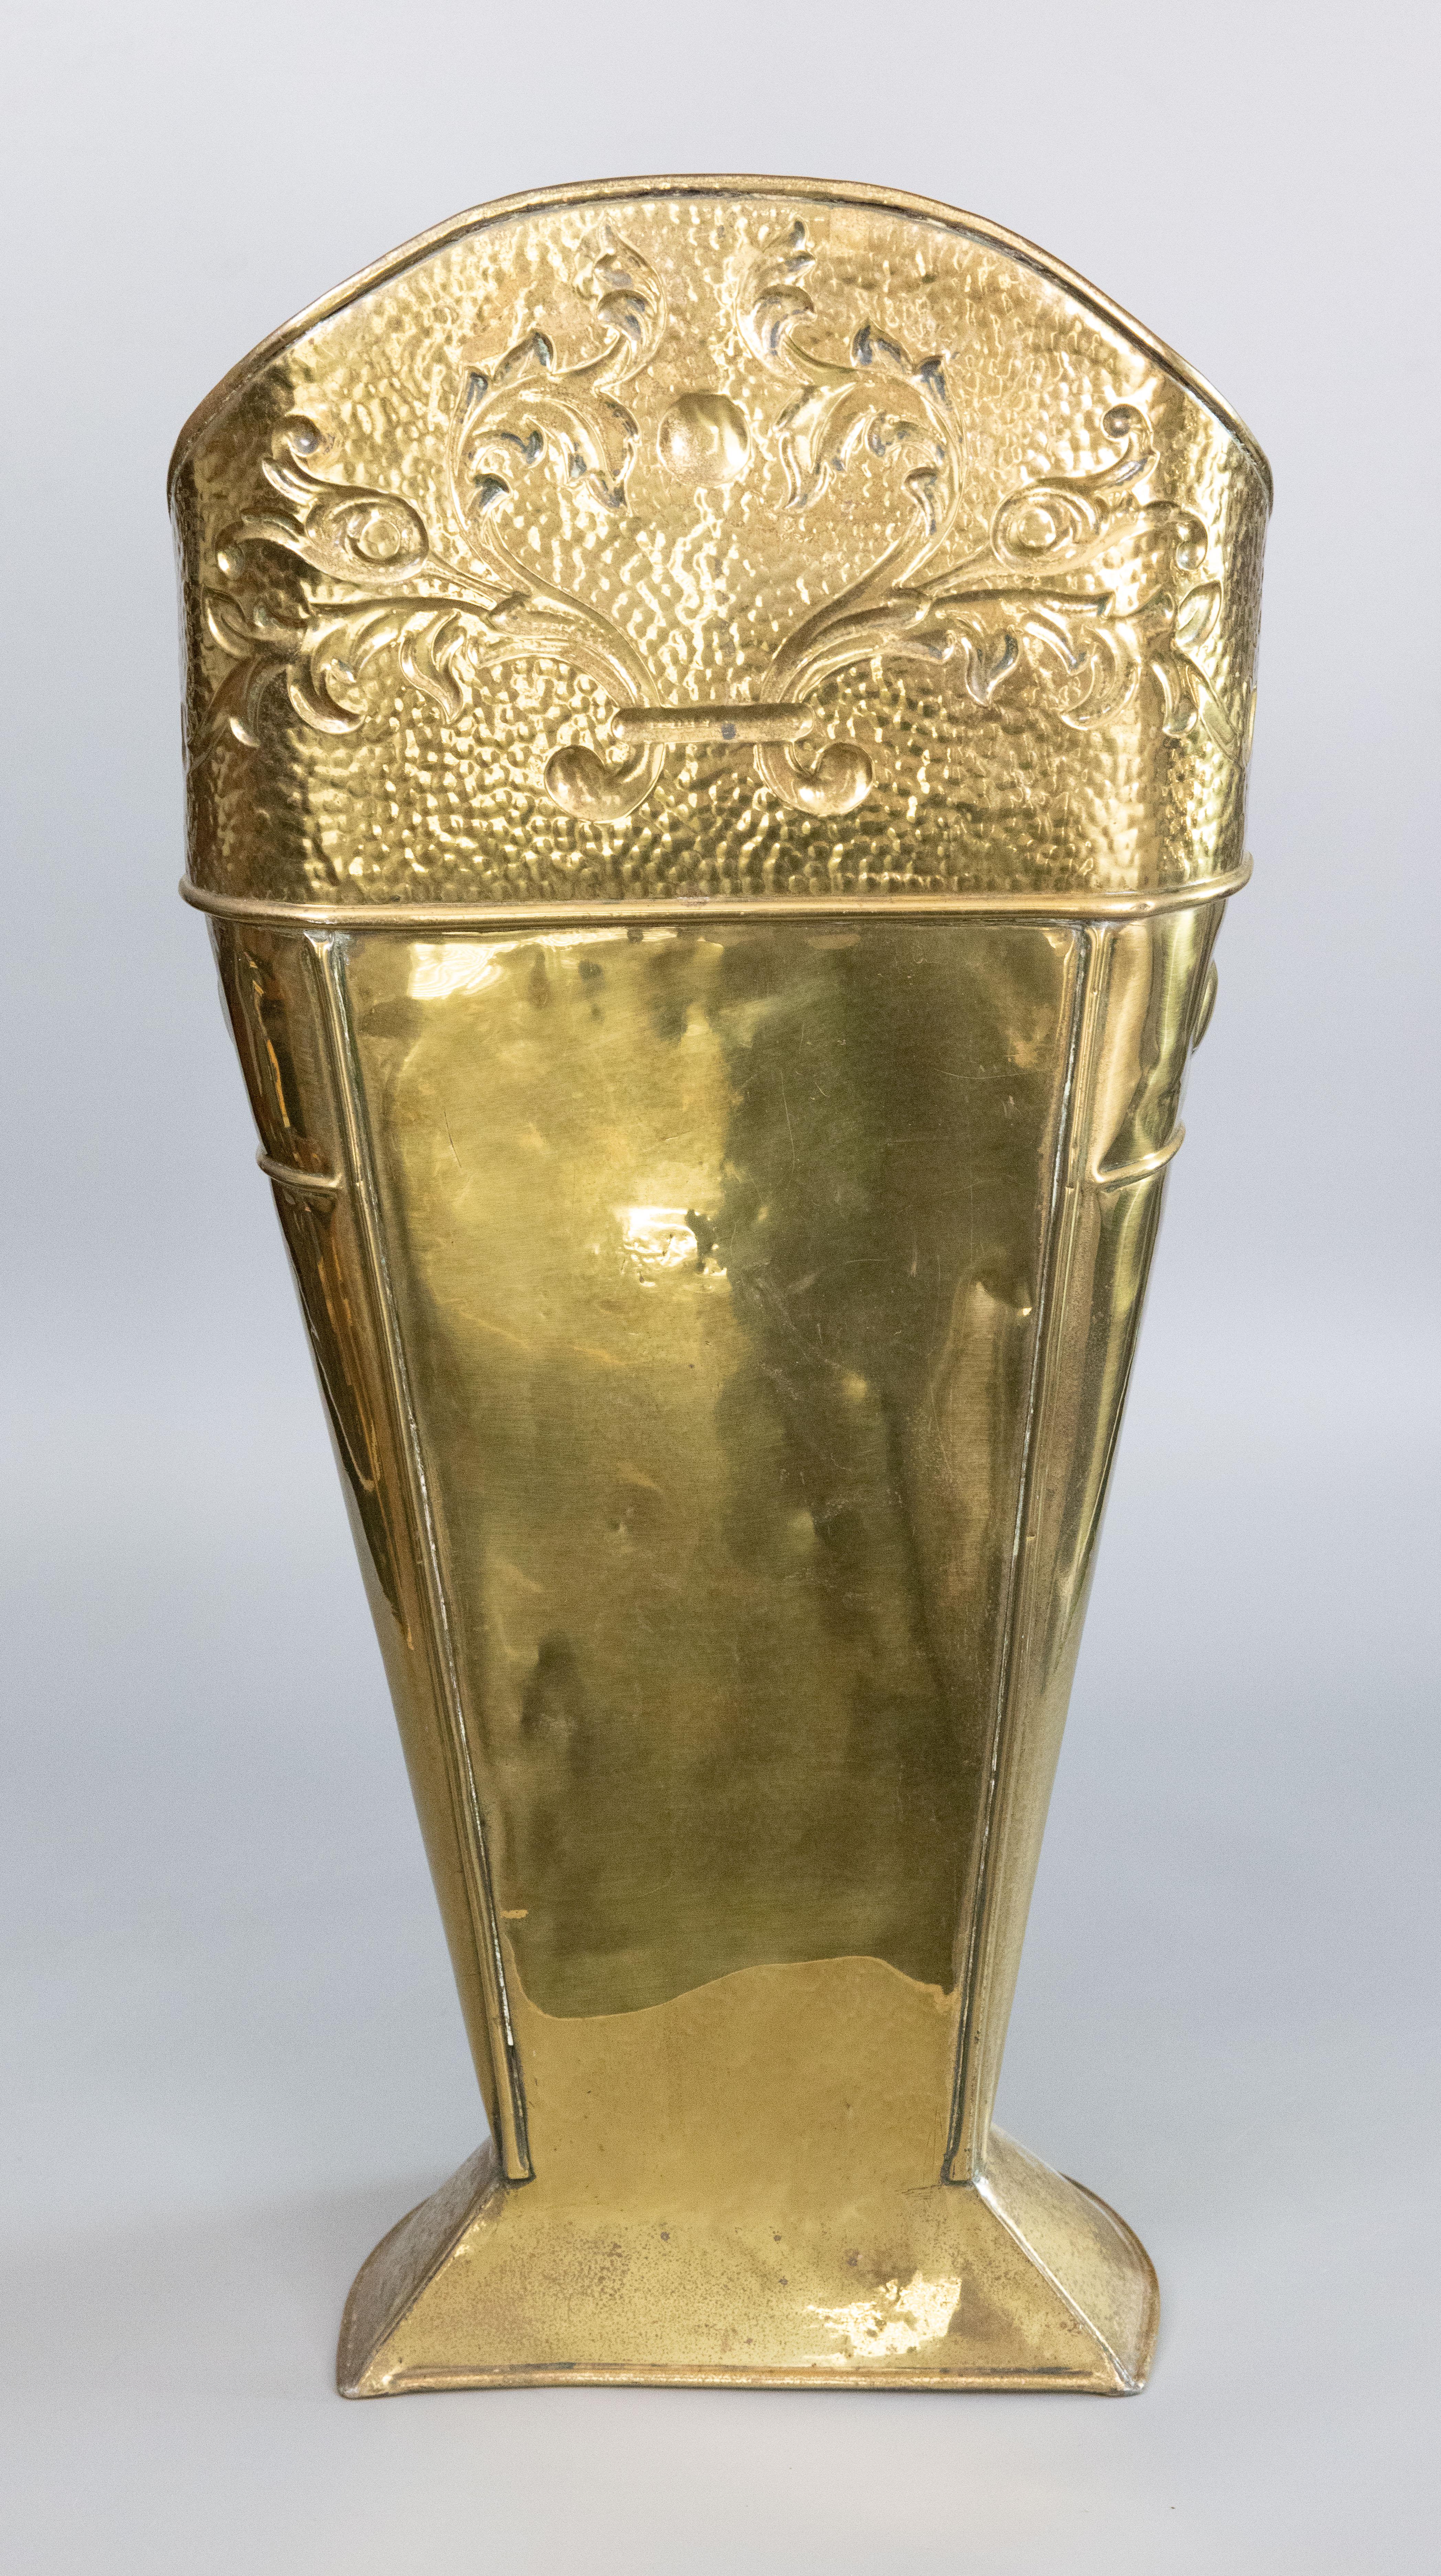 19th Century French Heraldic Hammered Brass Repoussé Grape Hod Umbrella Stand For Sale 1